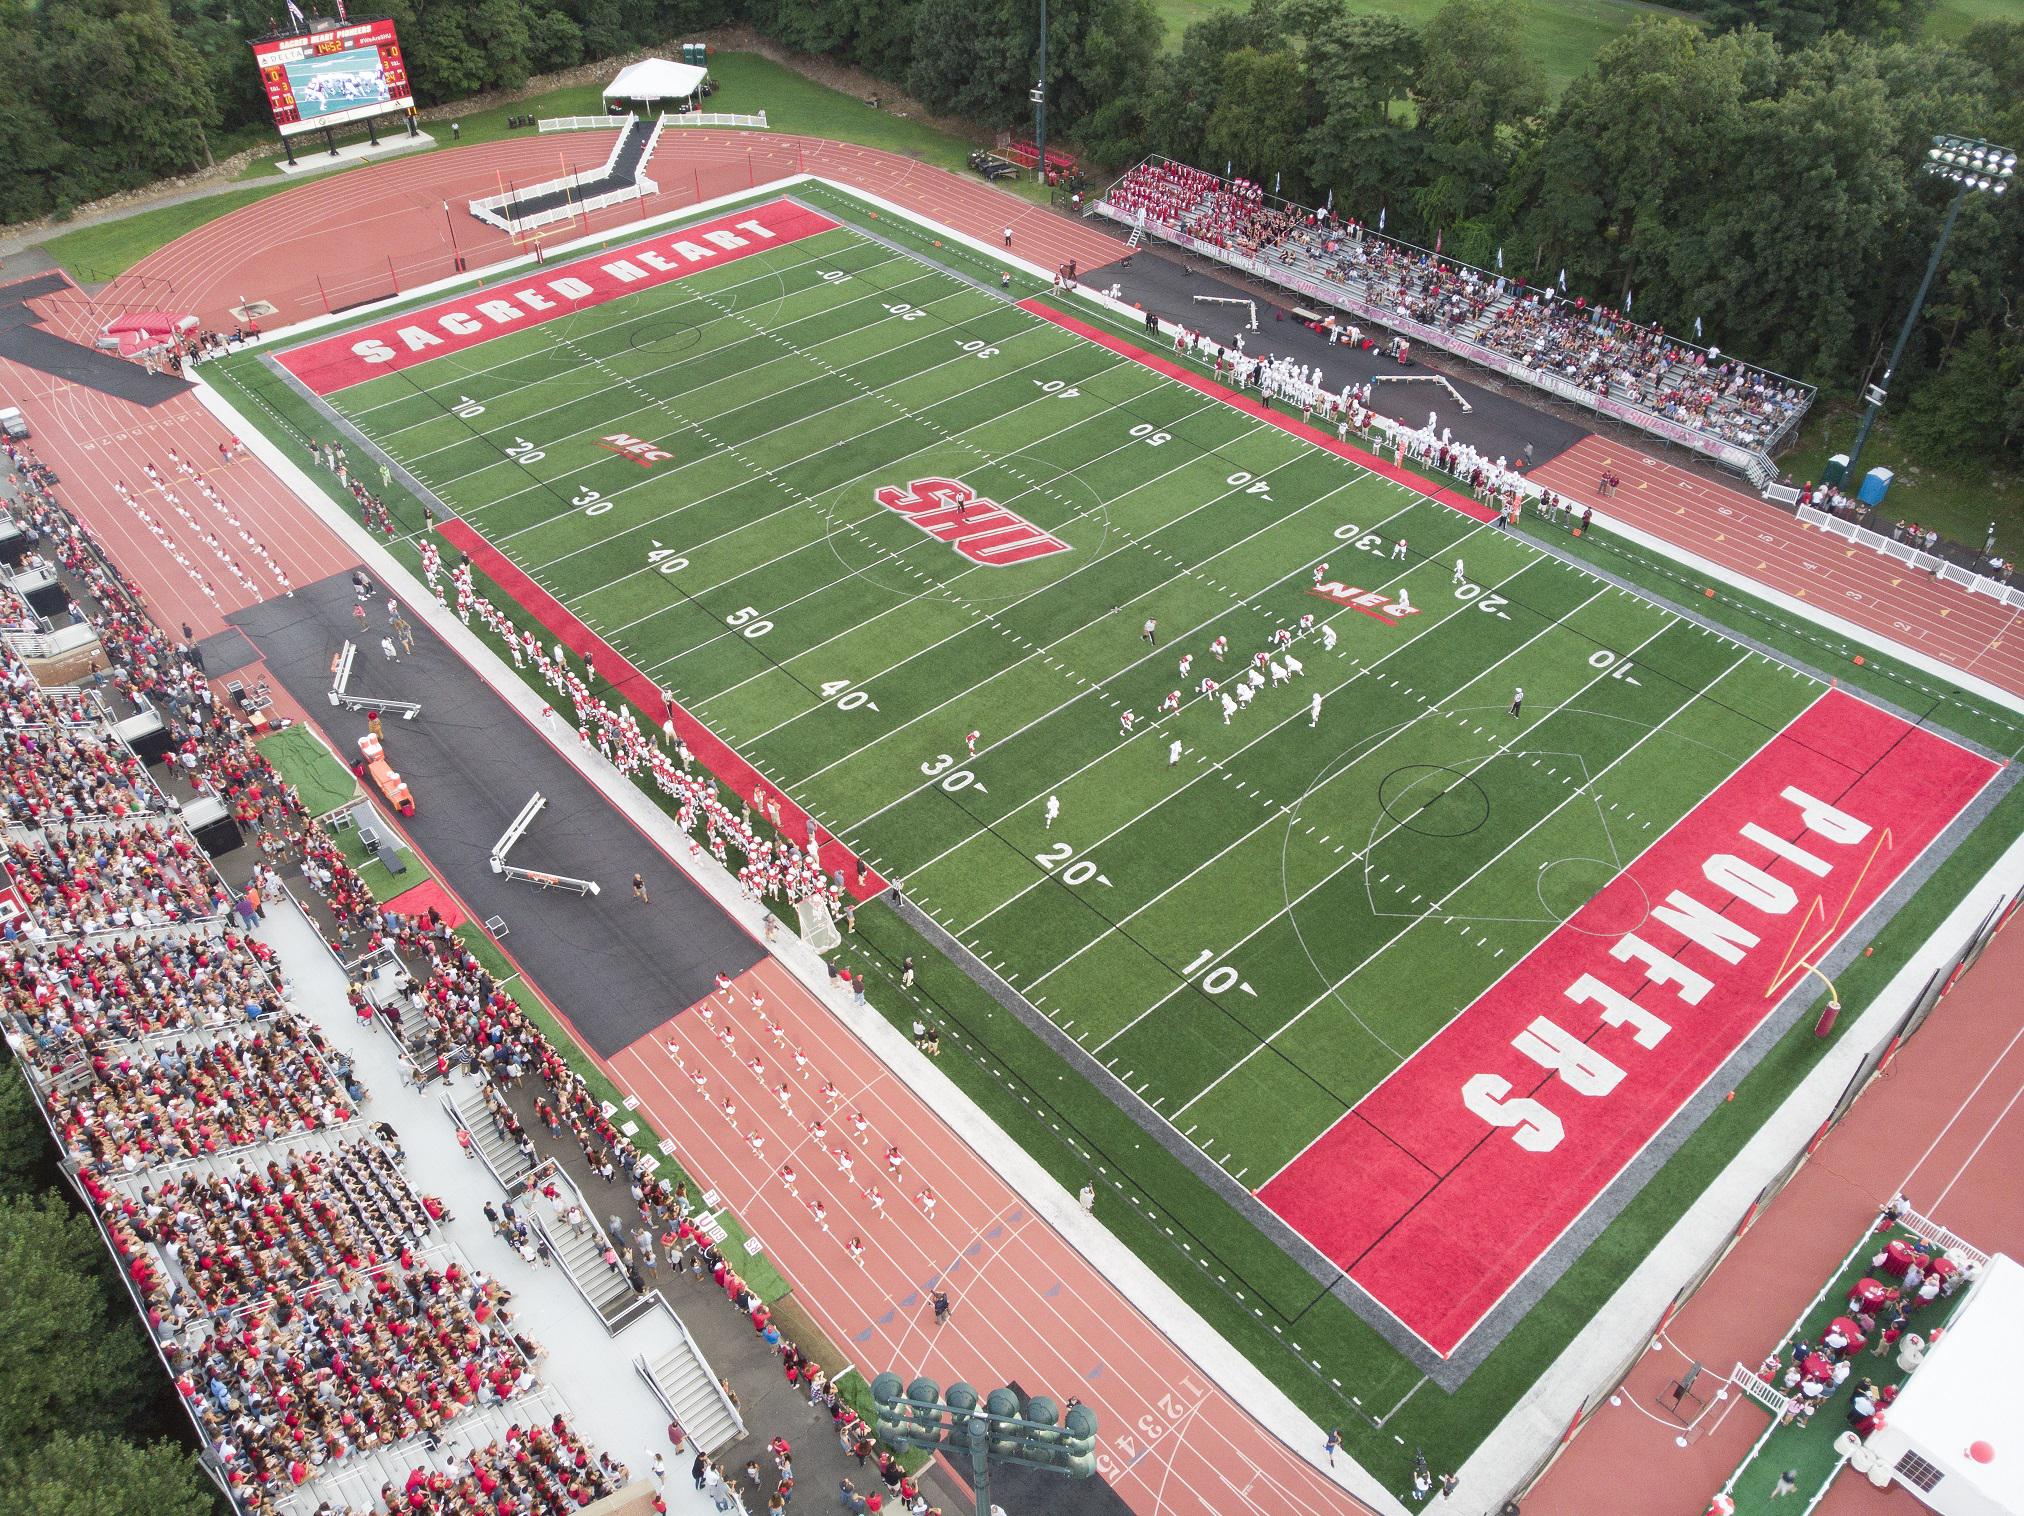 Notre DameFairfield to play football games at SHU's Campus Field